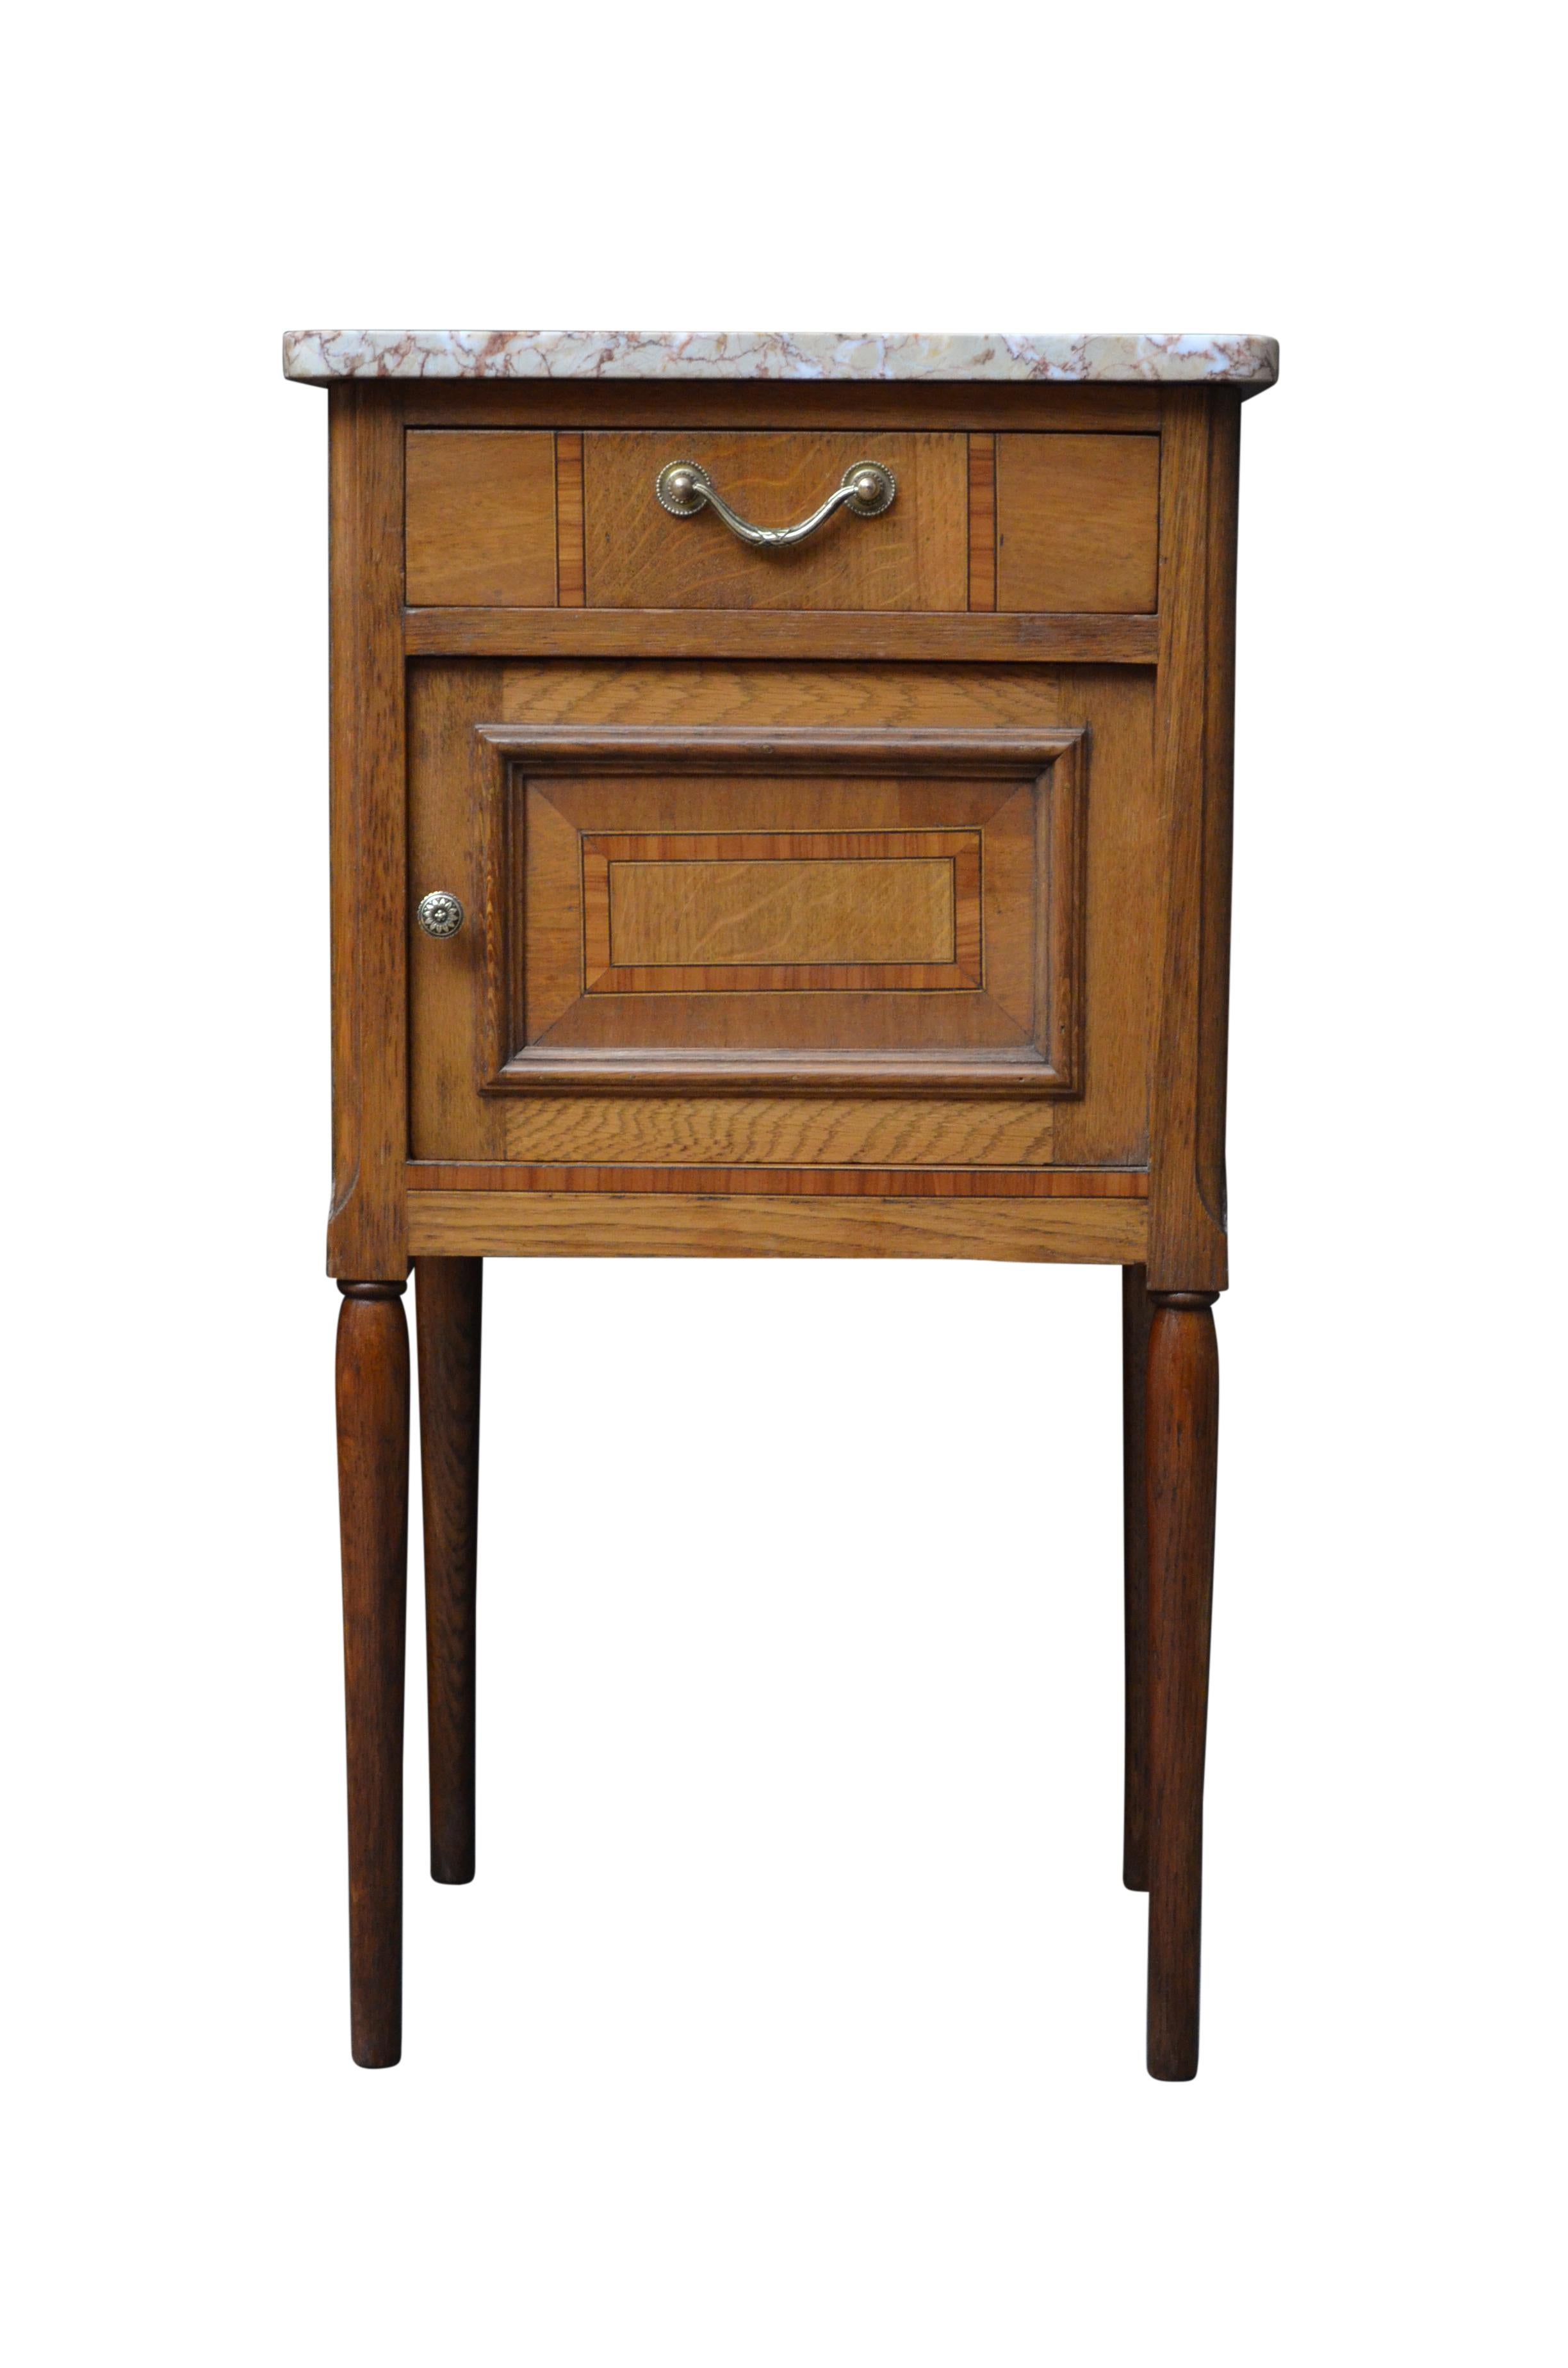 European Pair of Turn of the Century Bedside Cabinets in Oak